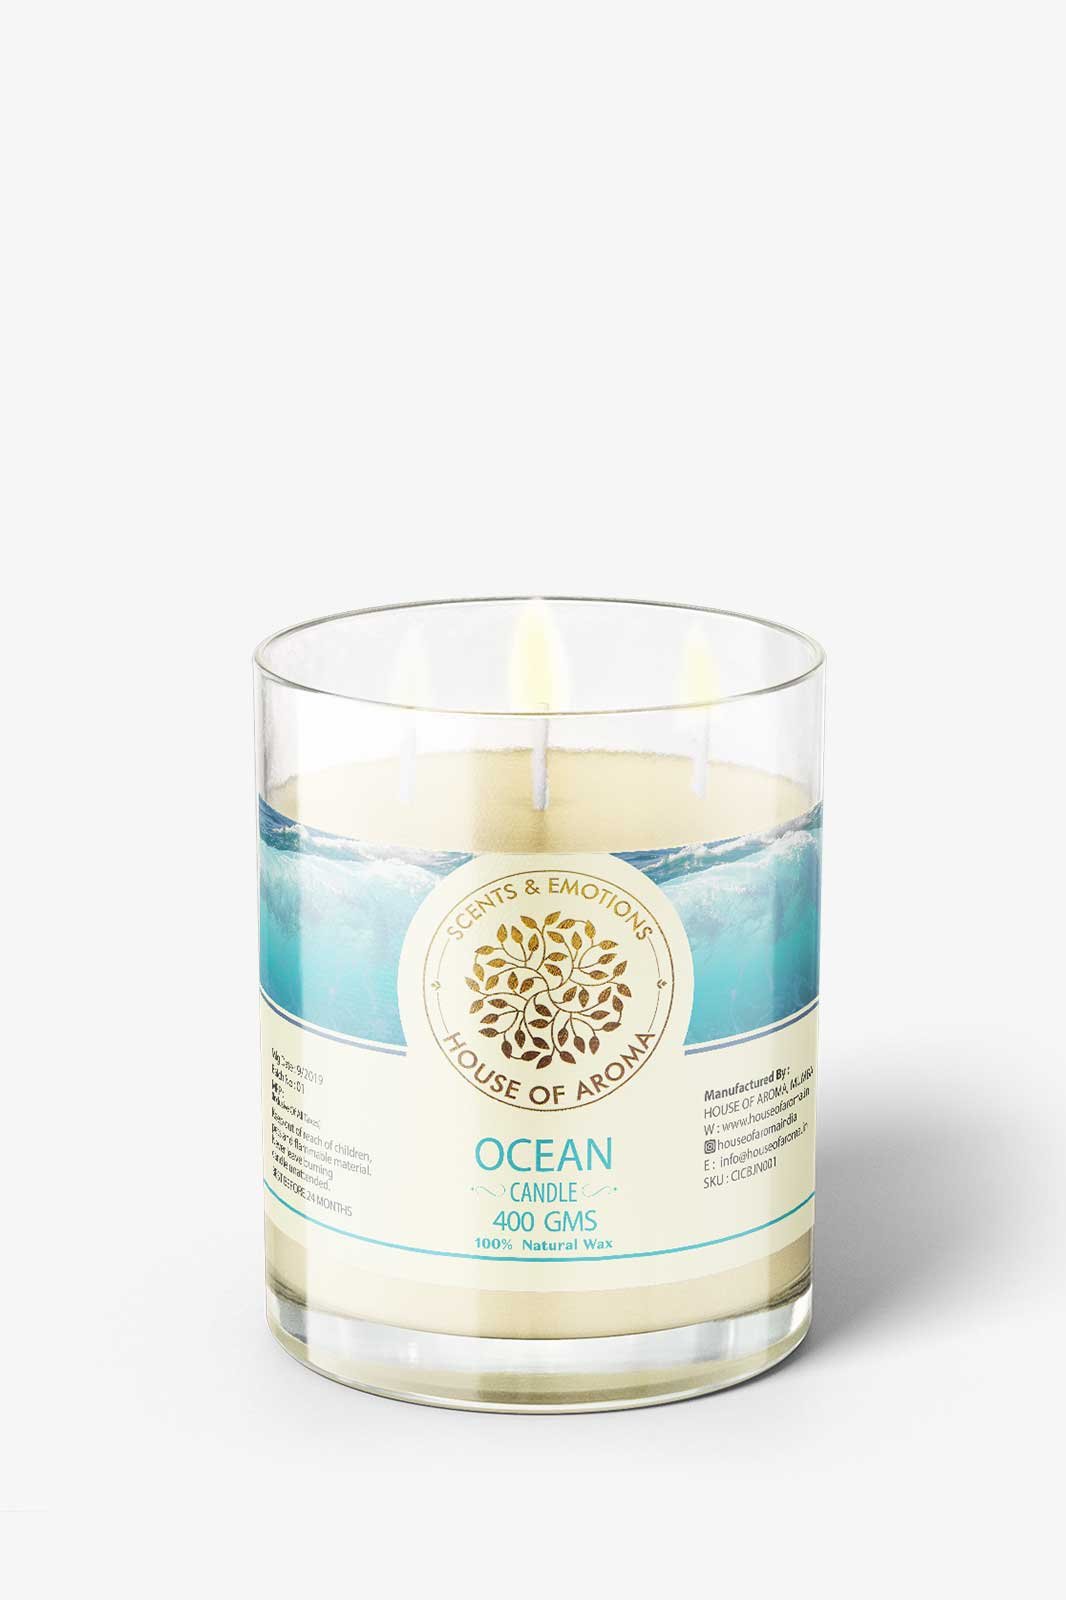 Natural Wax Ocean 3 Wick Candle, 3 wick candles india, 3 wick candle vanilla, 3 wick candle jars with lids, 3 wick candle container, 3 wick candle jar holder, ocean fragrance candle, ocean scent candles, ocean scented candles, ocean scent candle, ocean breeze candle fragrance, ocean fragrance for candles, ocean flower candle, jar scented candles,essential oil candles, essential oil for scented candles, essential oil beeswax candles, essential oil blends candles, essential oil candles non toxic, vegan essential oil candles, essential oil organic candles, pure essential oil candles, House of Aroma, home decor candle, room decor candles, scented candles decoration, best candles for home decor, scented candles for home decor, room decor with candles, decorating homemade candles, home decor scented candles, natural scented candles, natural scents for candles, organic scented candles India, luxury scented candles India, natural soy candle wax, natural fragrance for candles, natural soy candle company, best scented candles India, scented candles for bedroom, organic, scented candles India, most fragrant scented candles, glass jar candles, bell jar candles, bell jar candle, bell jar candle India, essential oil wax candle, soy wax essential oil candles, essential oil wax candles, natural scented candle brands, scented candles best brand, candle brands in India, organic scented candles India, best scented candle brands in India, top candle brands in India, best candle brands in the world, bedroom candles, room fragrance candles, best bedroom candles, best room scented candles, room freshener candles, beeswax candles, beeswax candles scented, beeswax candles jar